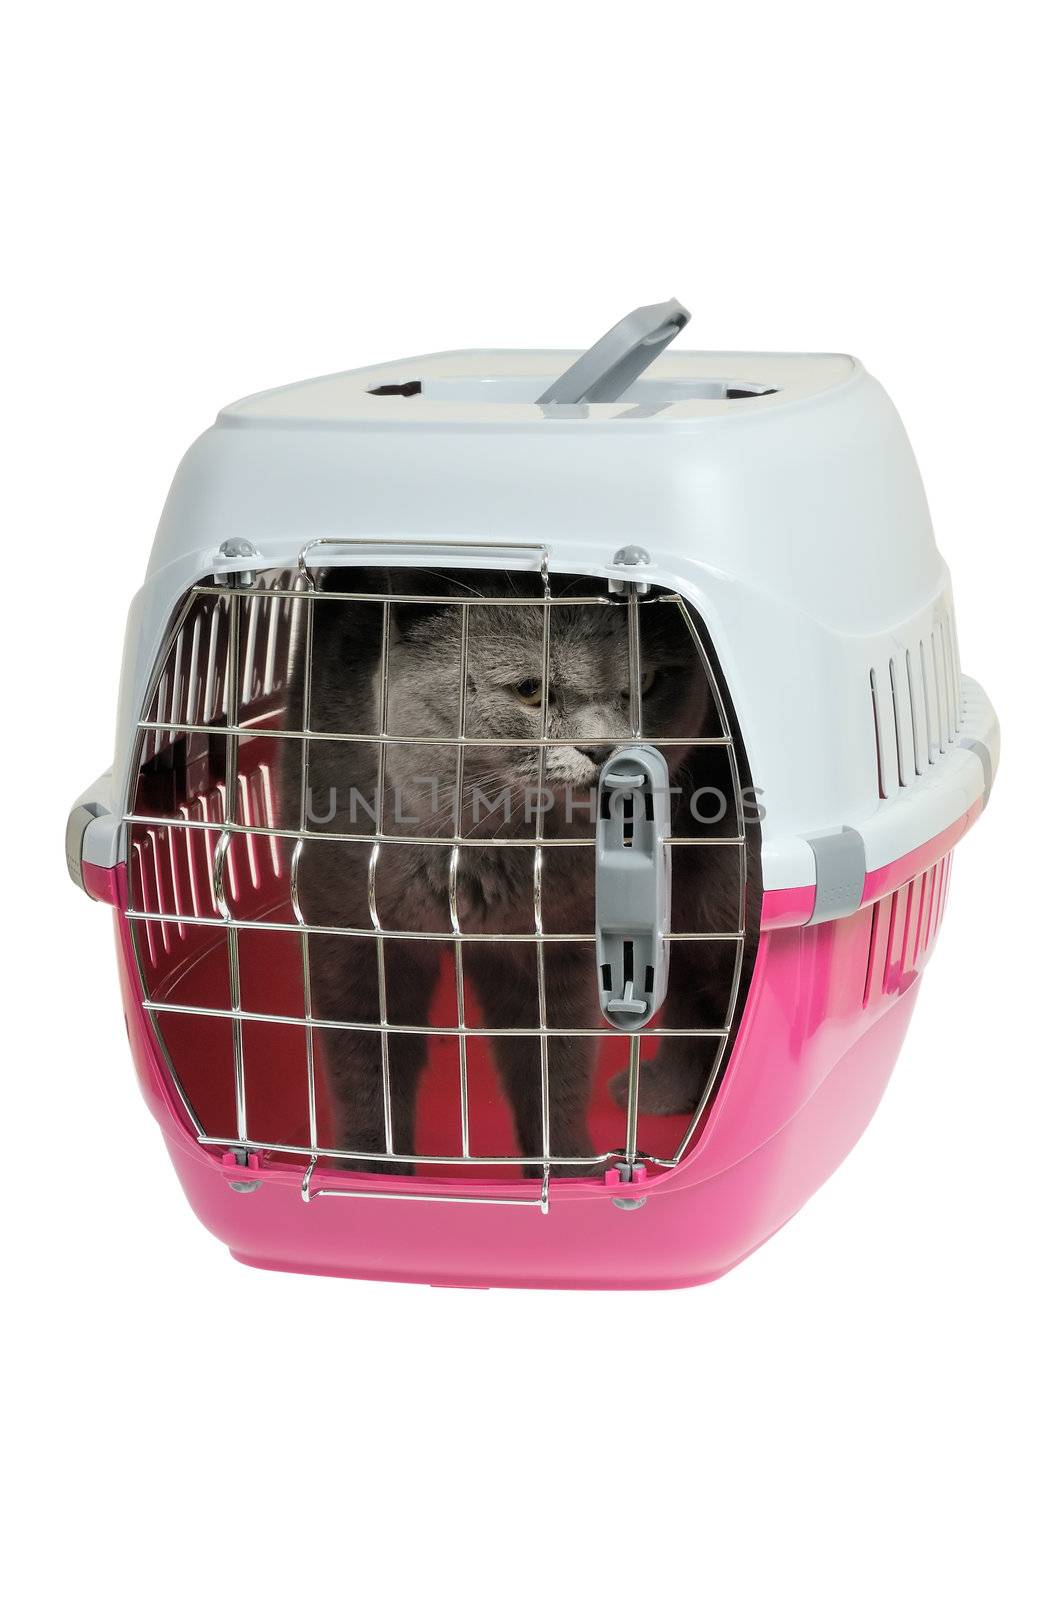 Pet carrier with cat. Isolated on white background.